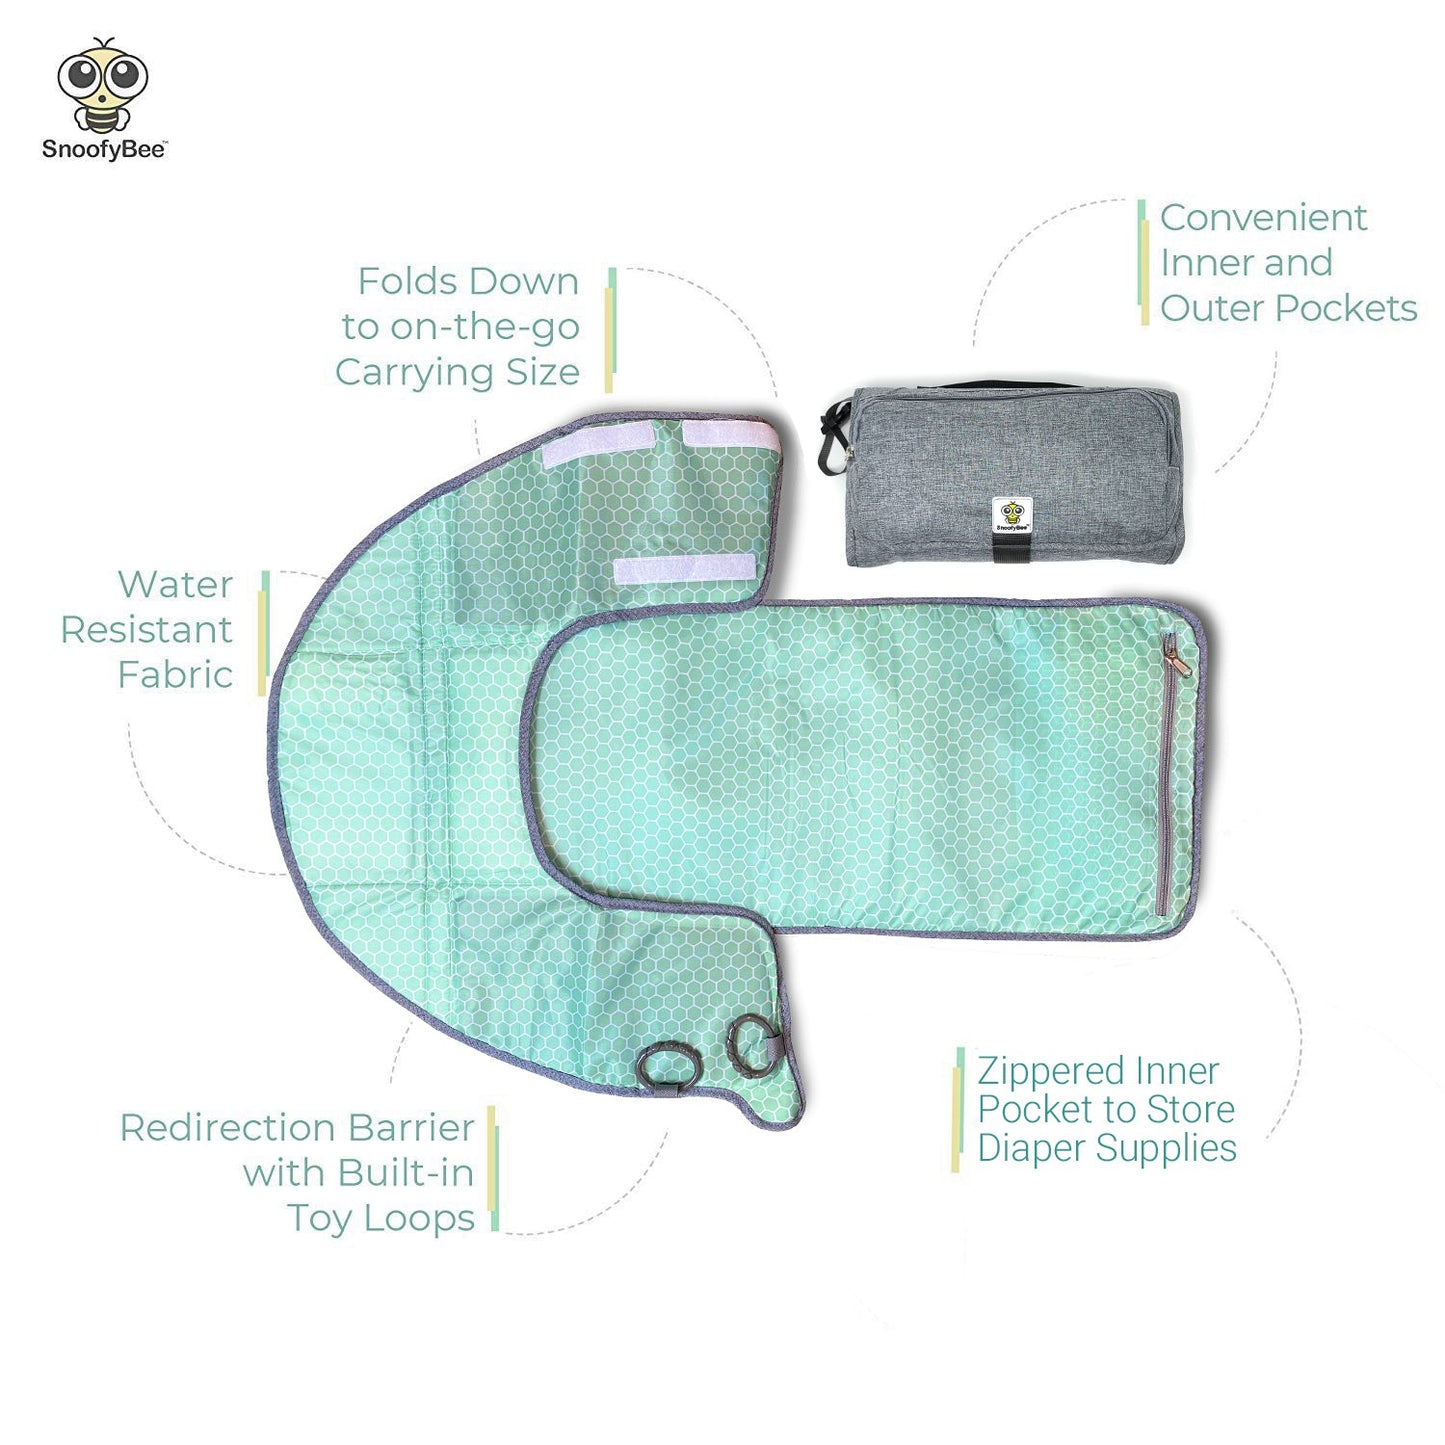 Factory Seconds Playtime Changing Pad™ - Excursion Edition